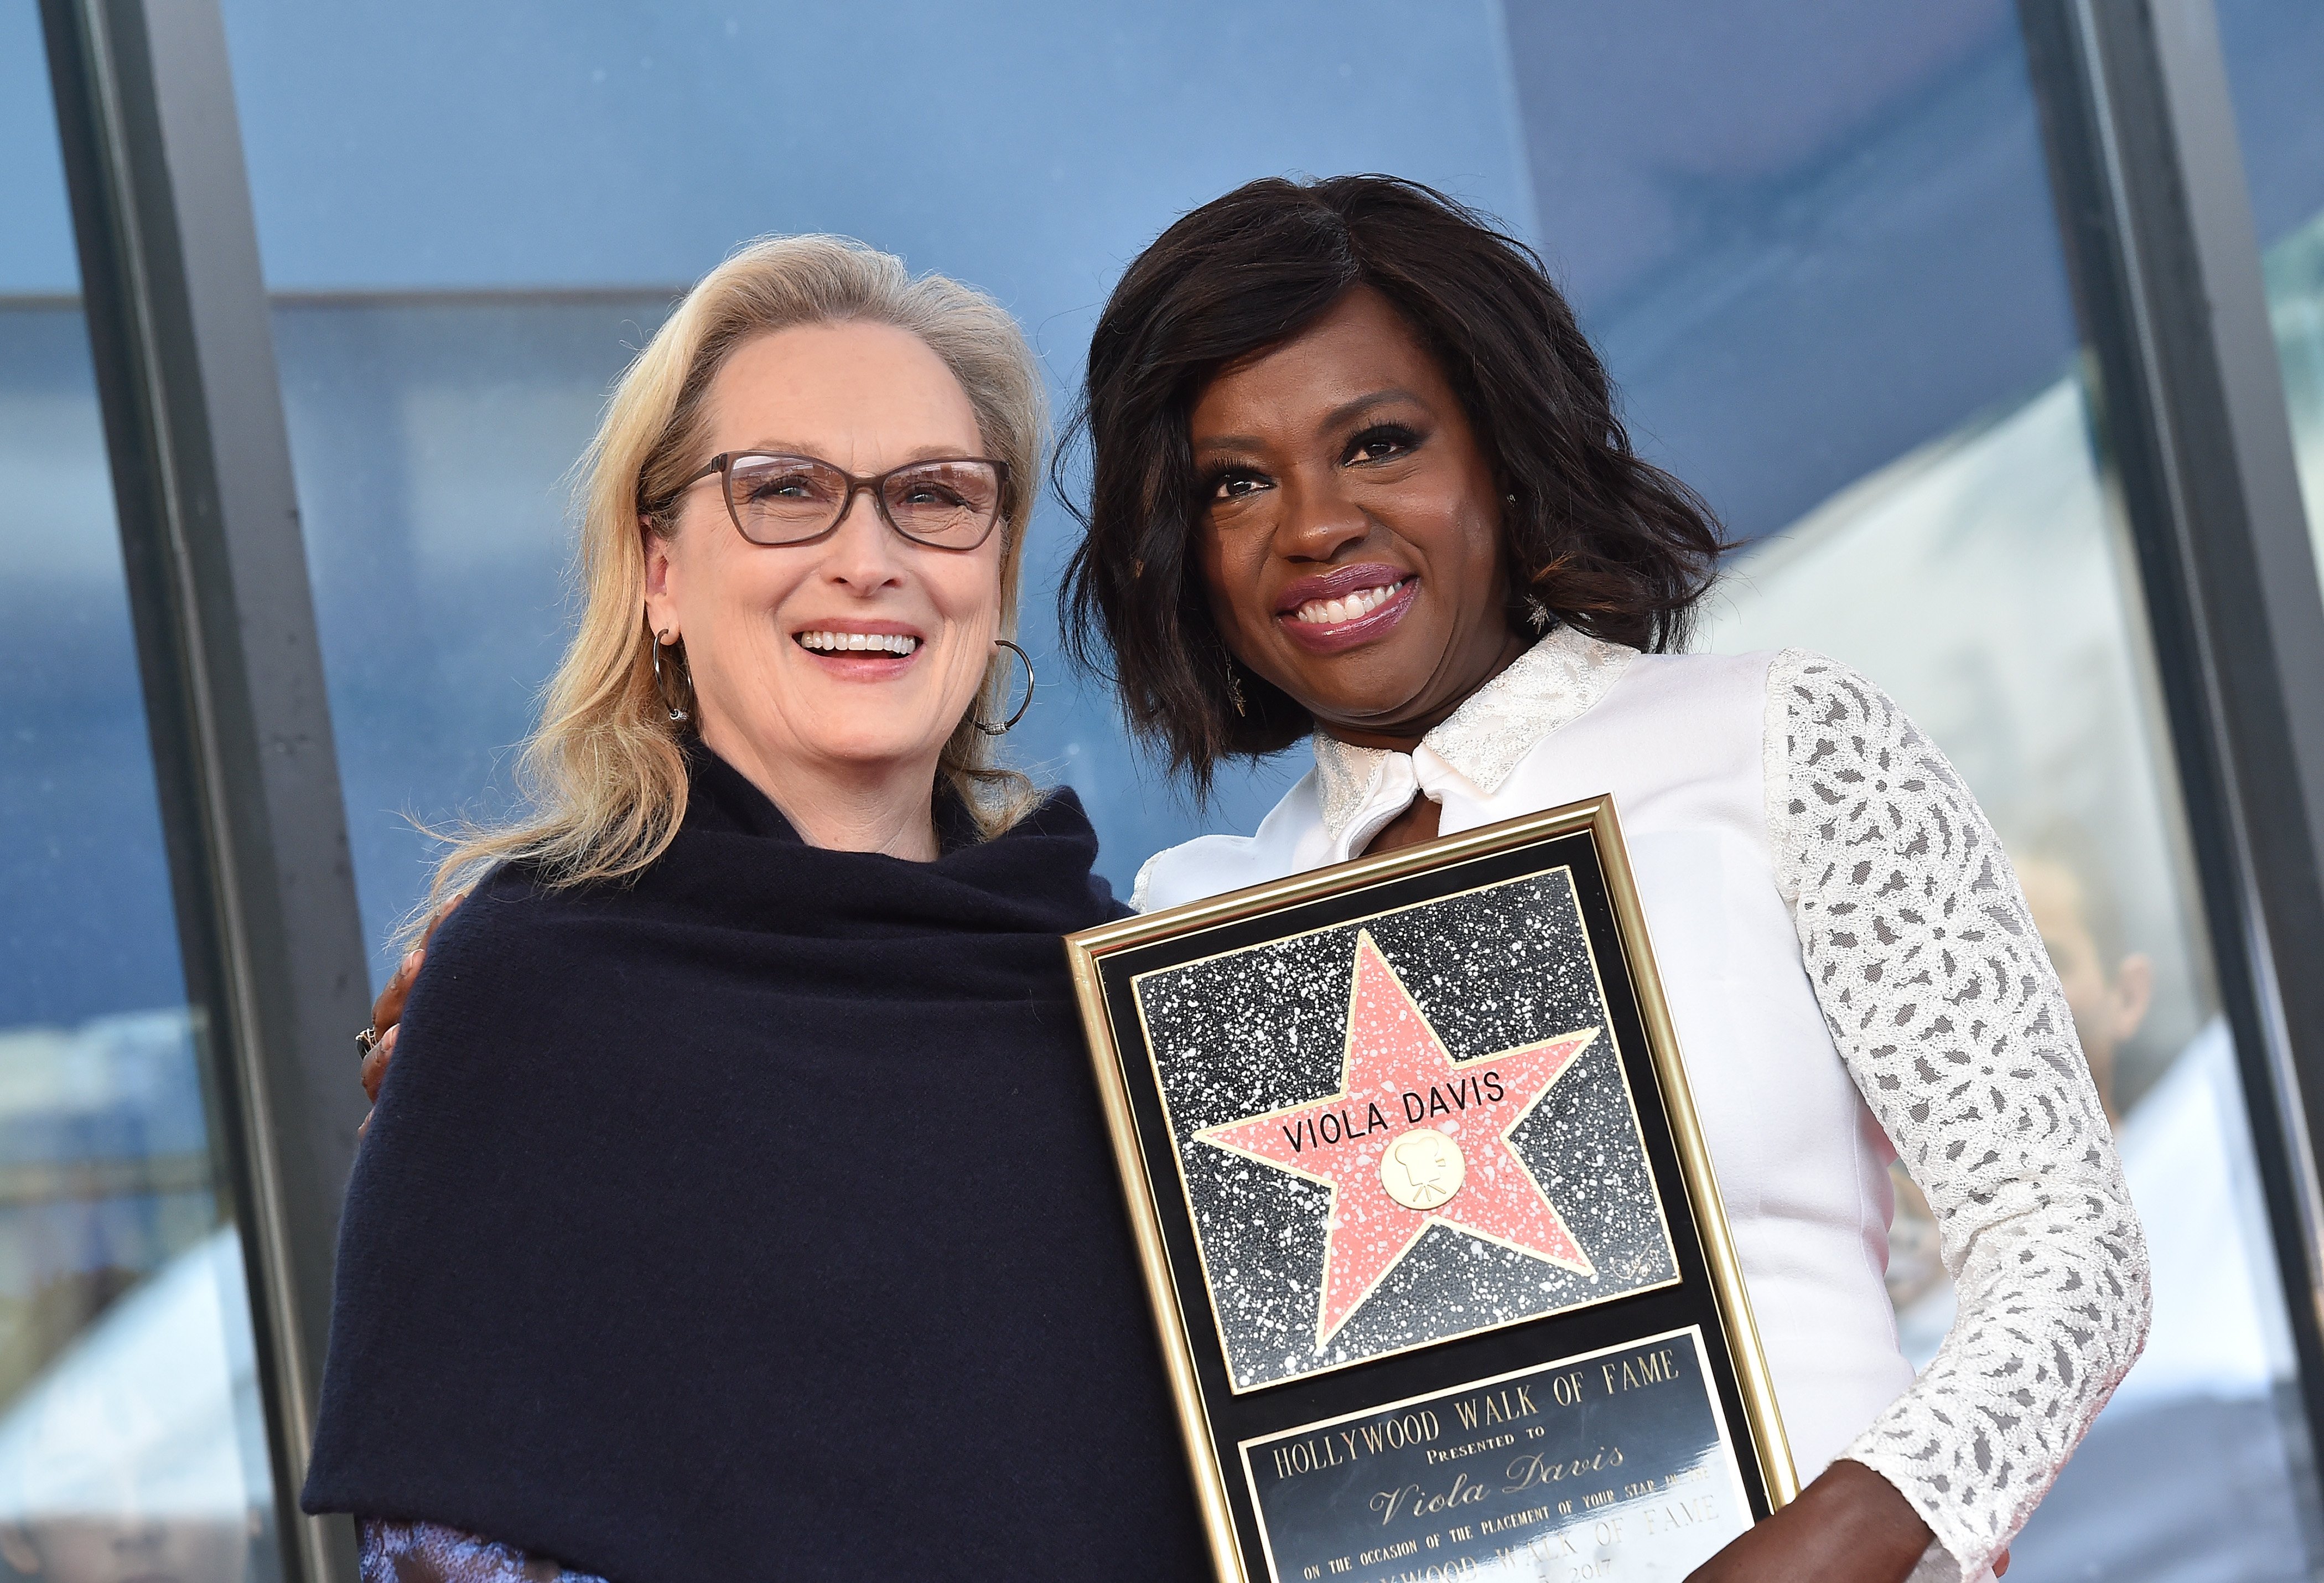 Meryl Streep and Viola Davis at the ceremony honoring the latter with a star on the Hollywood Walk of Fame on January 5, 2017, in Hollywood, California. | Source: Axelle/Bauer-Griffin/FilmMagic/Getty Images